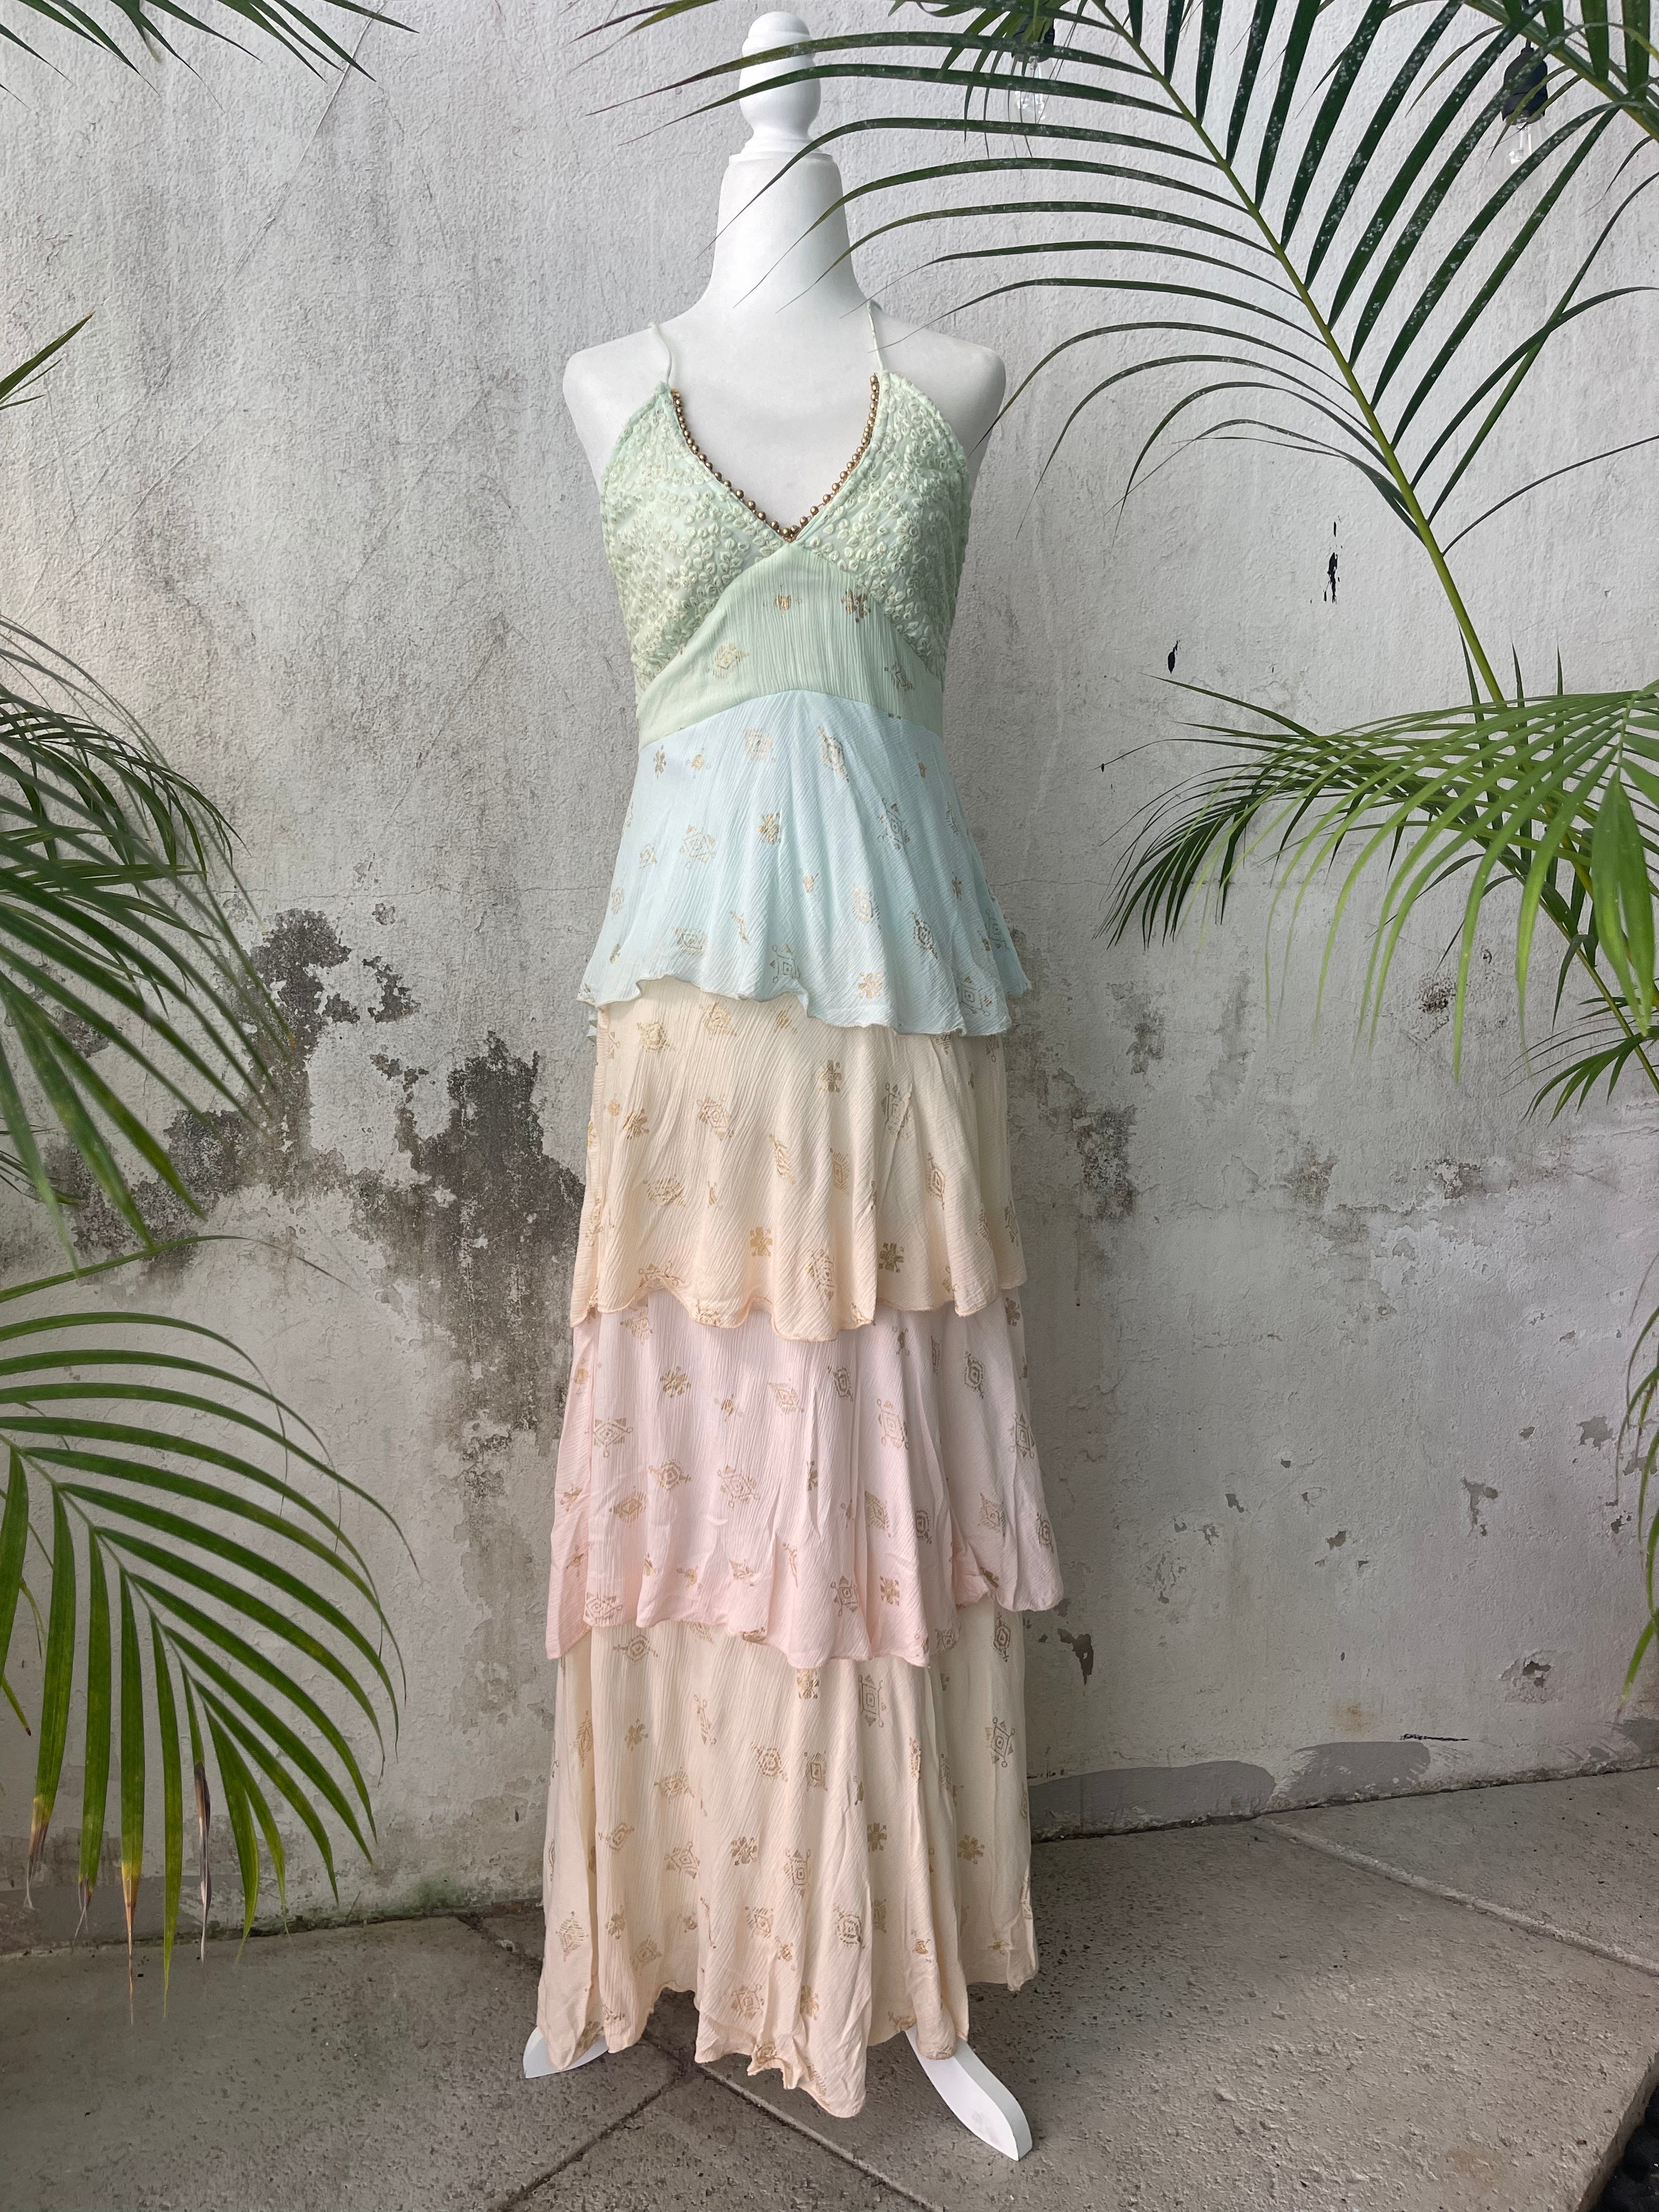 Cotton Candy Waterfall Gown